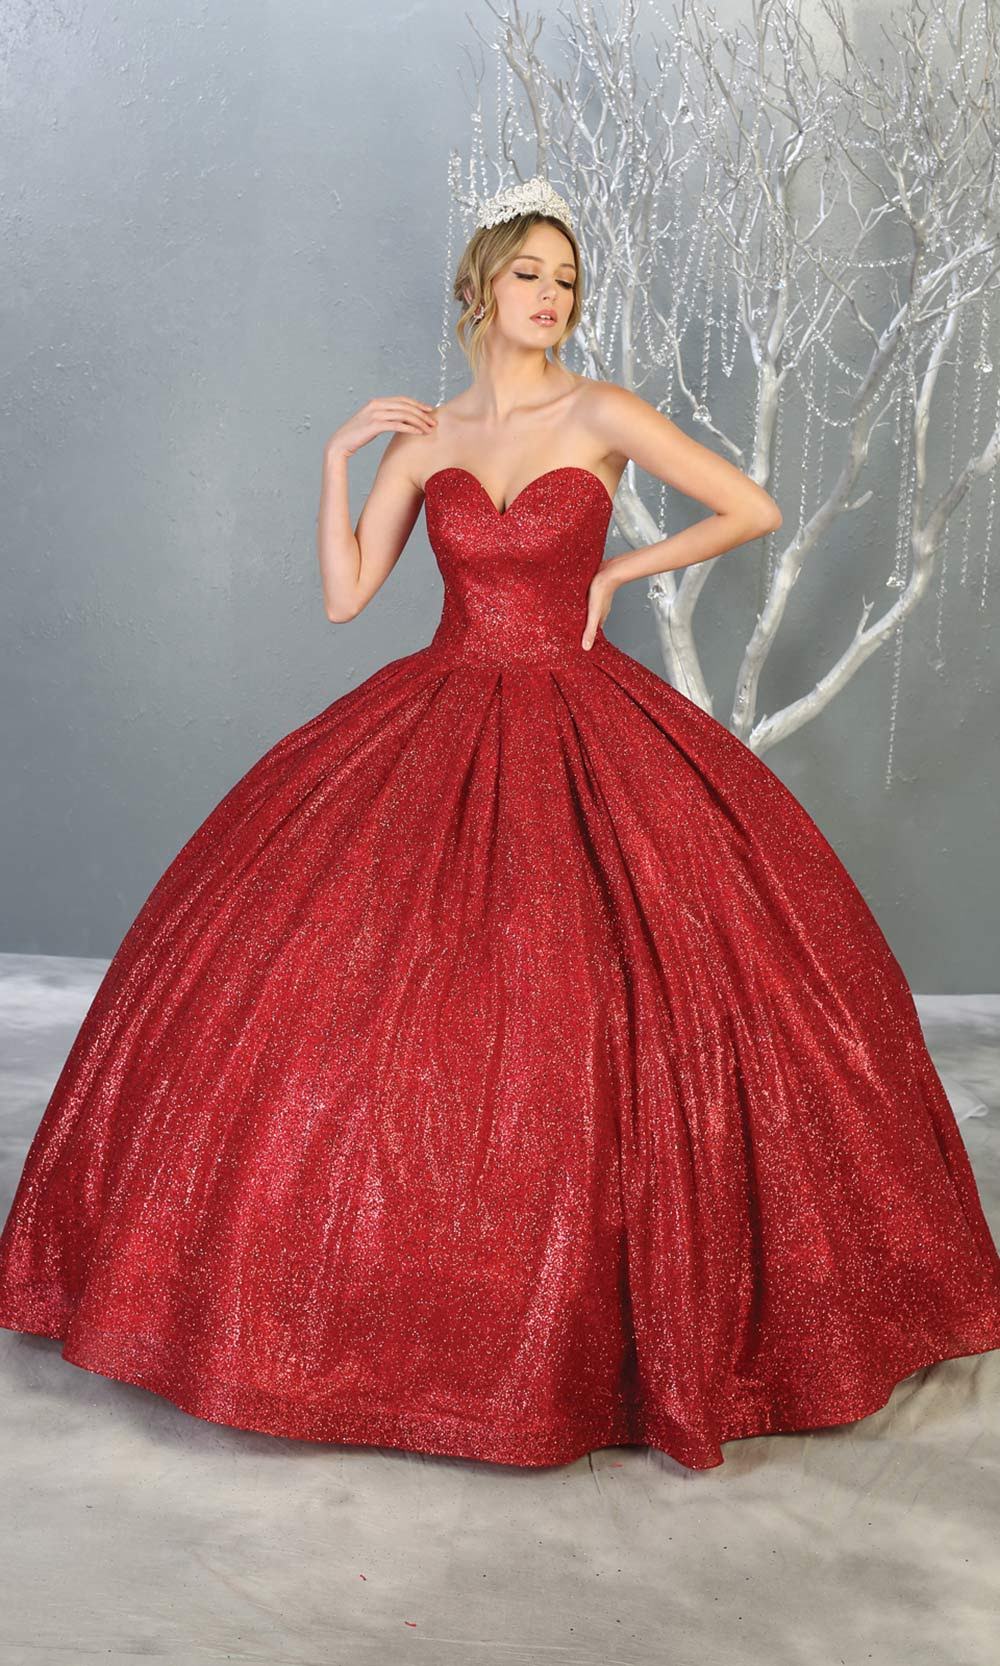 Mayqueen LK138 red quinceanera metallic shiny ballgown. This strapless red ball gown is perfect for engagement dress, wedding reception, indowestern party gown, sweet 16, debut, sweet 15, sweet 18. Plus sizes available for red ballgowns